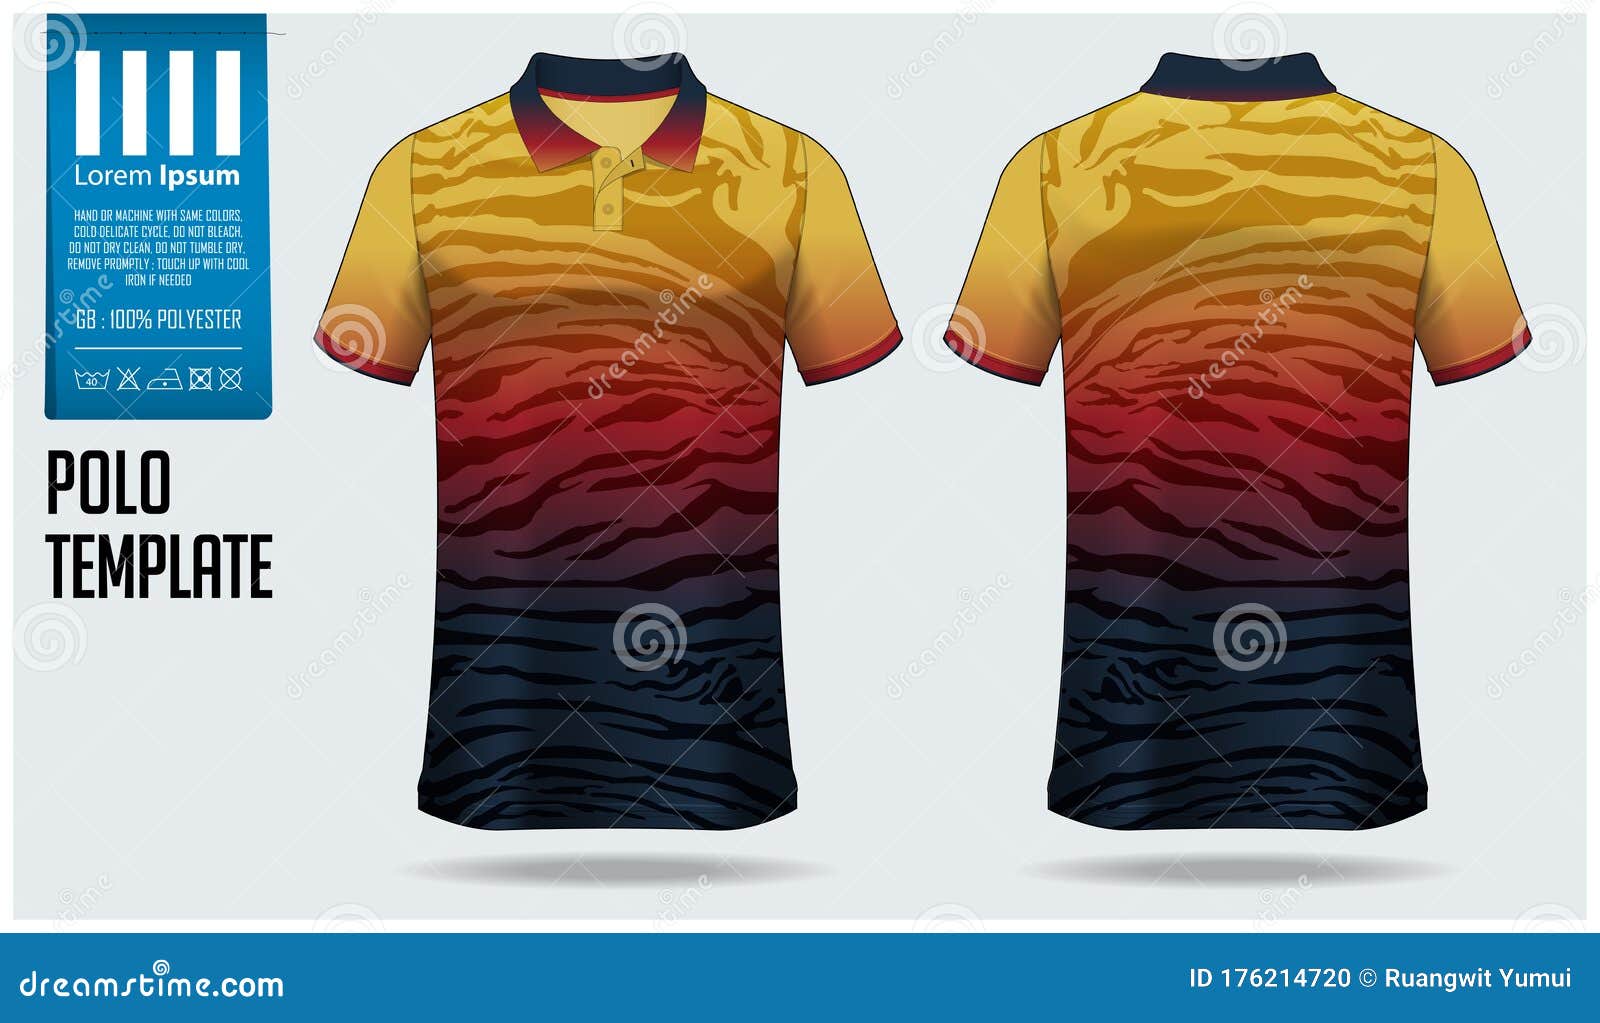 Download Polo T-shirt Mockup Template Design For Soccer Jersey ...